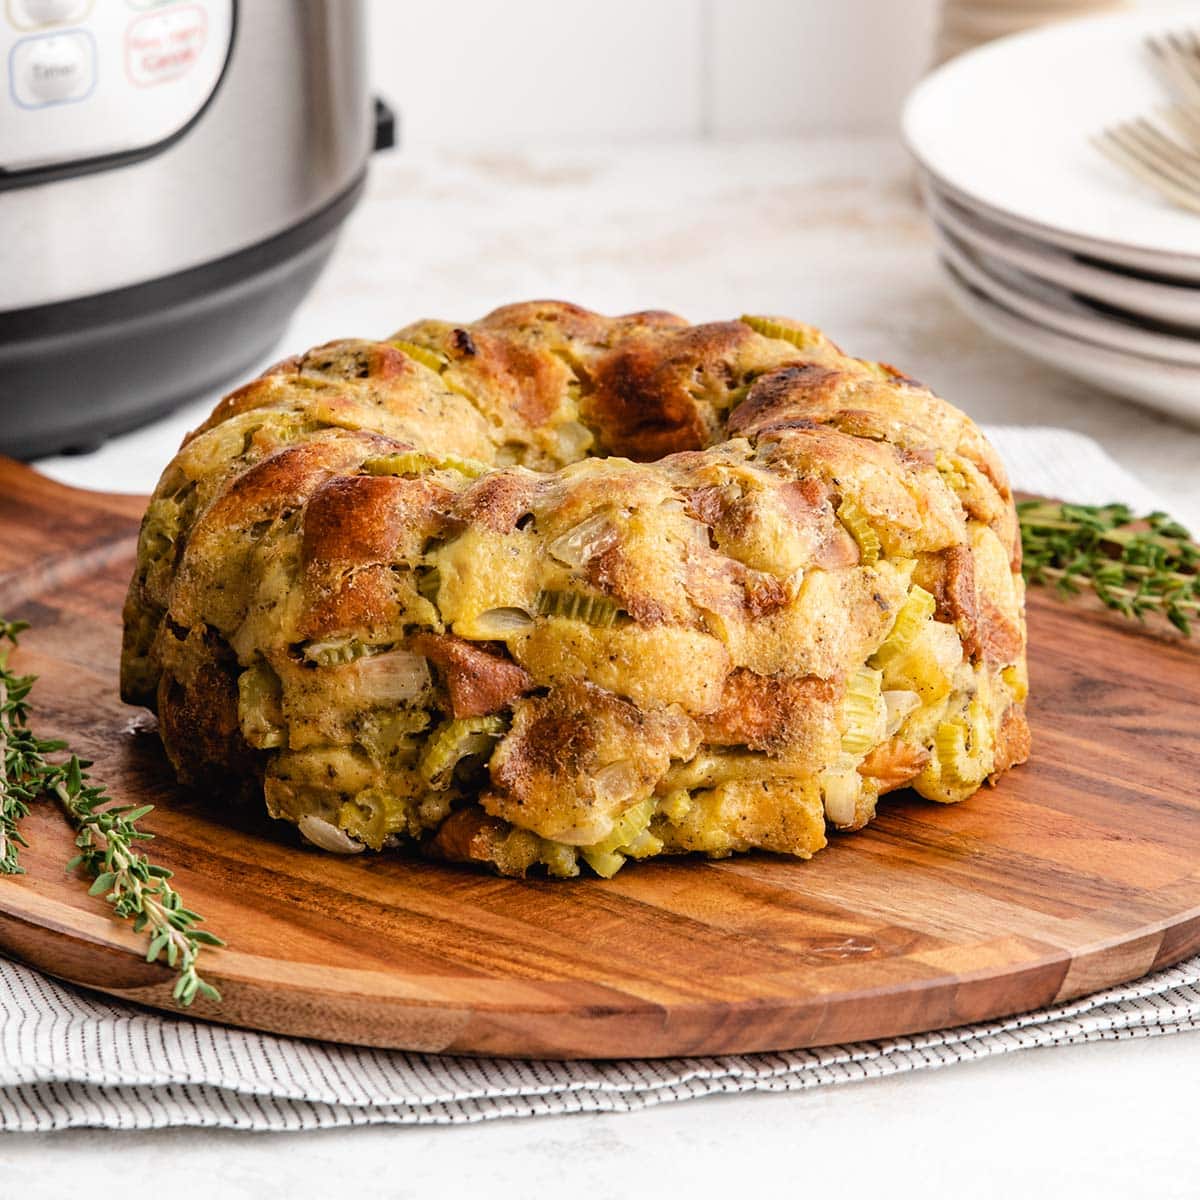 https://therecipewell.com/wp-content/uploads/2021/10/Instant-Pot-Stuffing-square.jpg